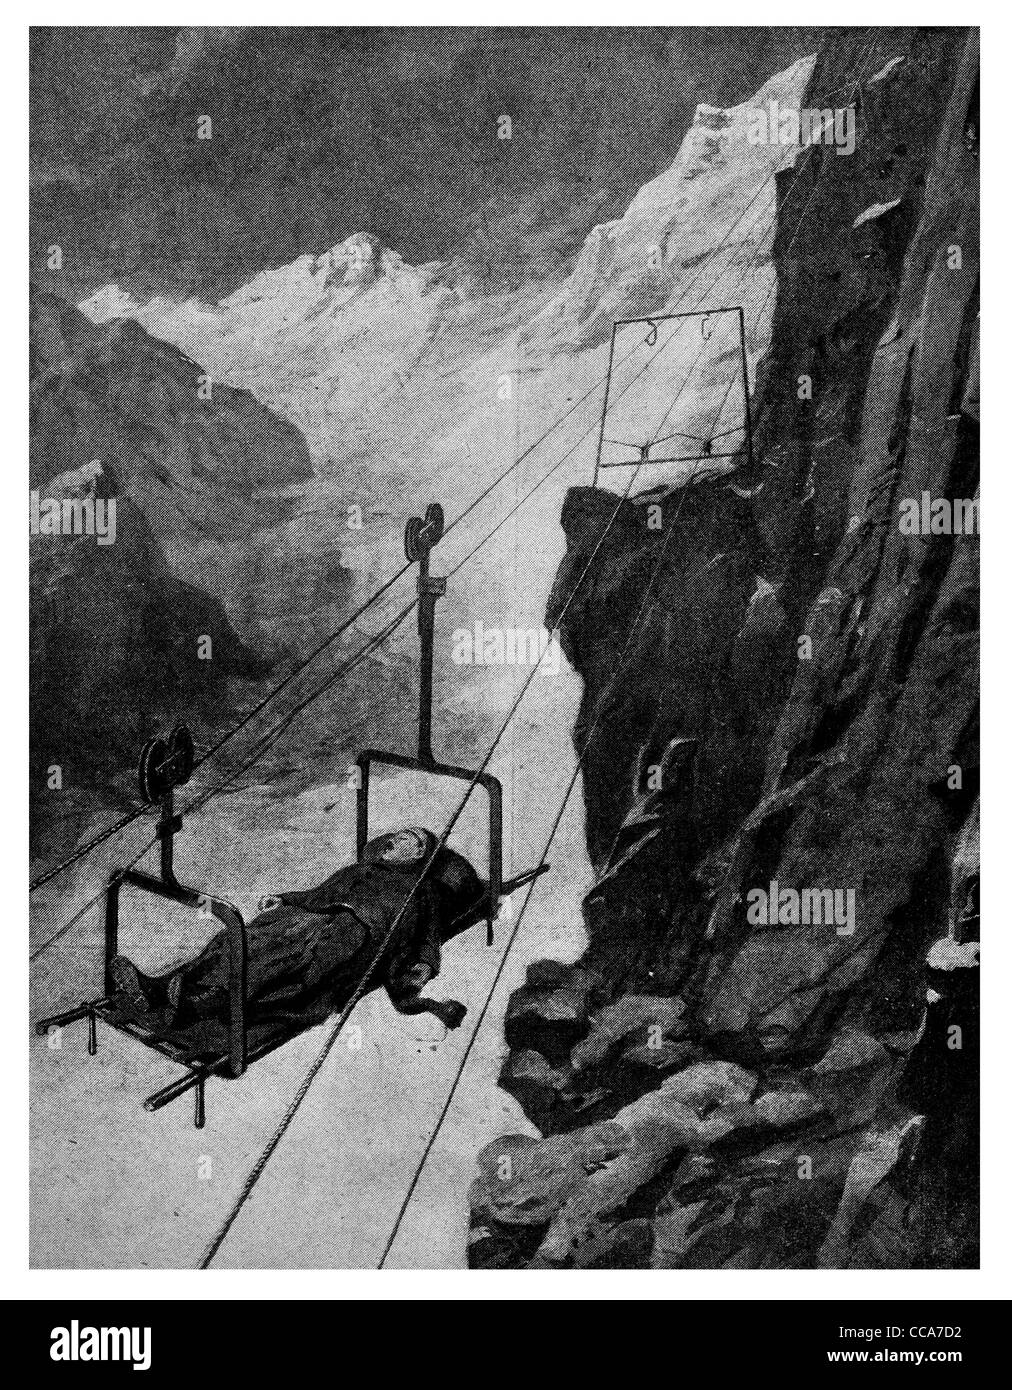 1916 wounded zip wire stretcher Italian Army Alpini elite mountain warfare rescue aid medical attention sick injured winter snow Stock Photo